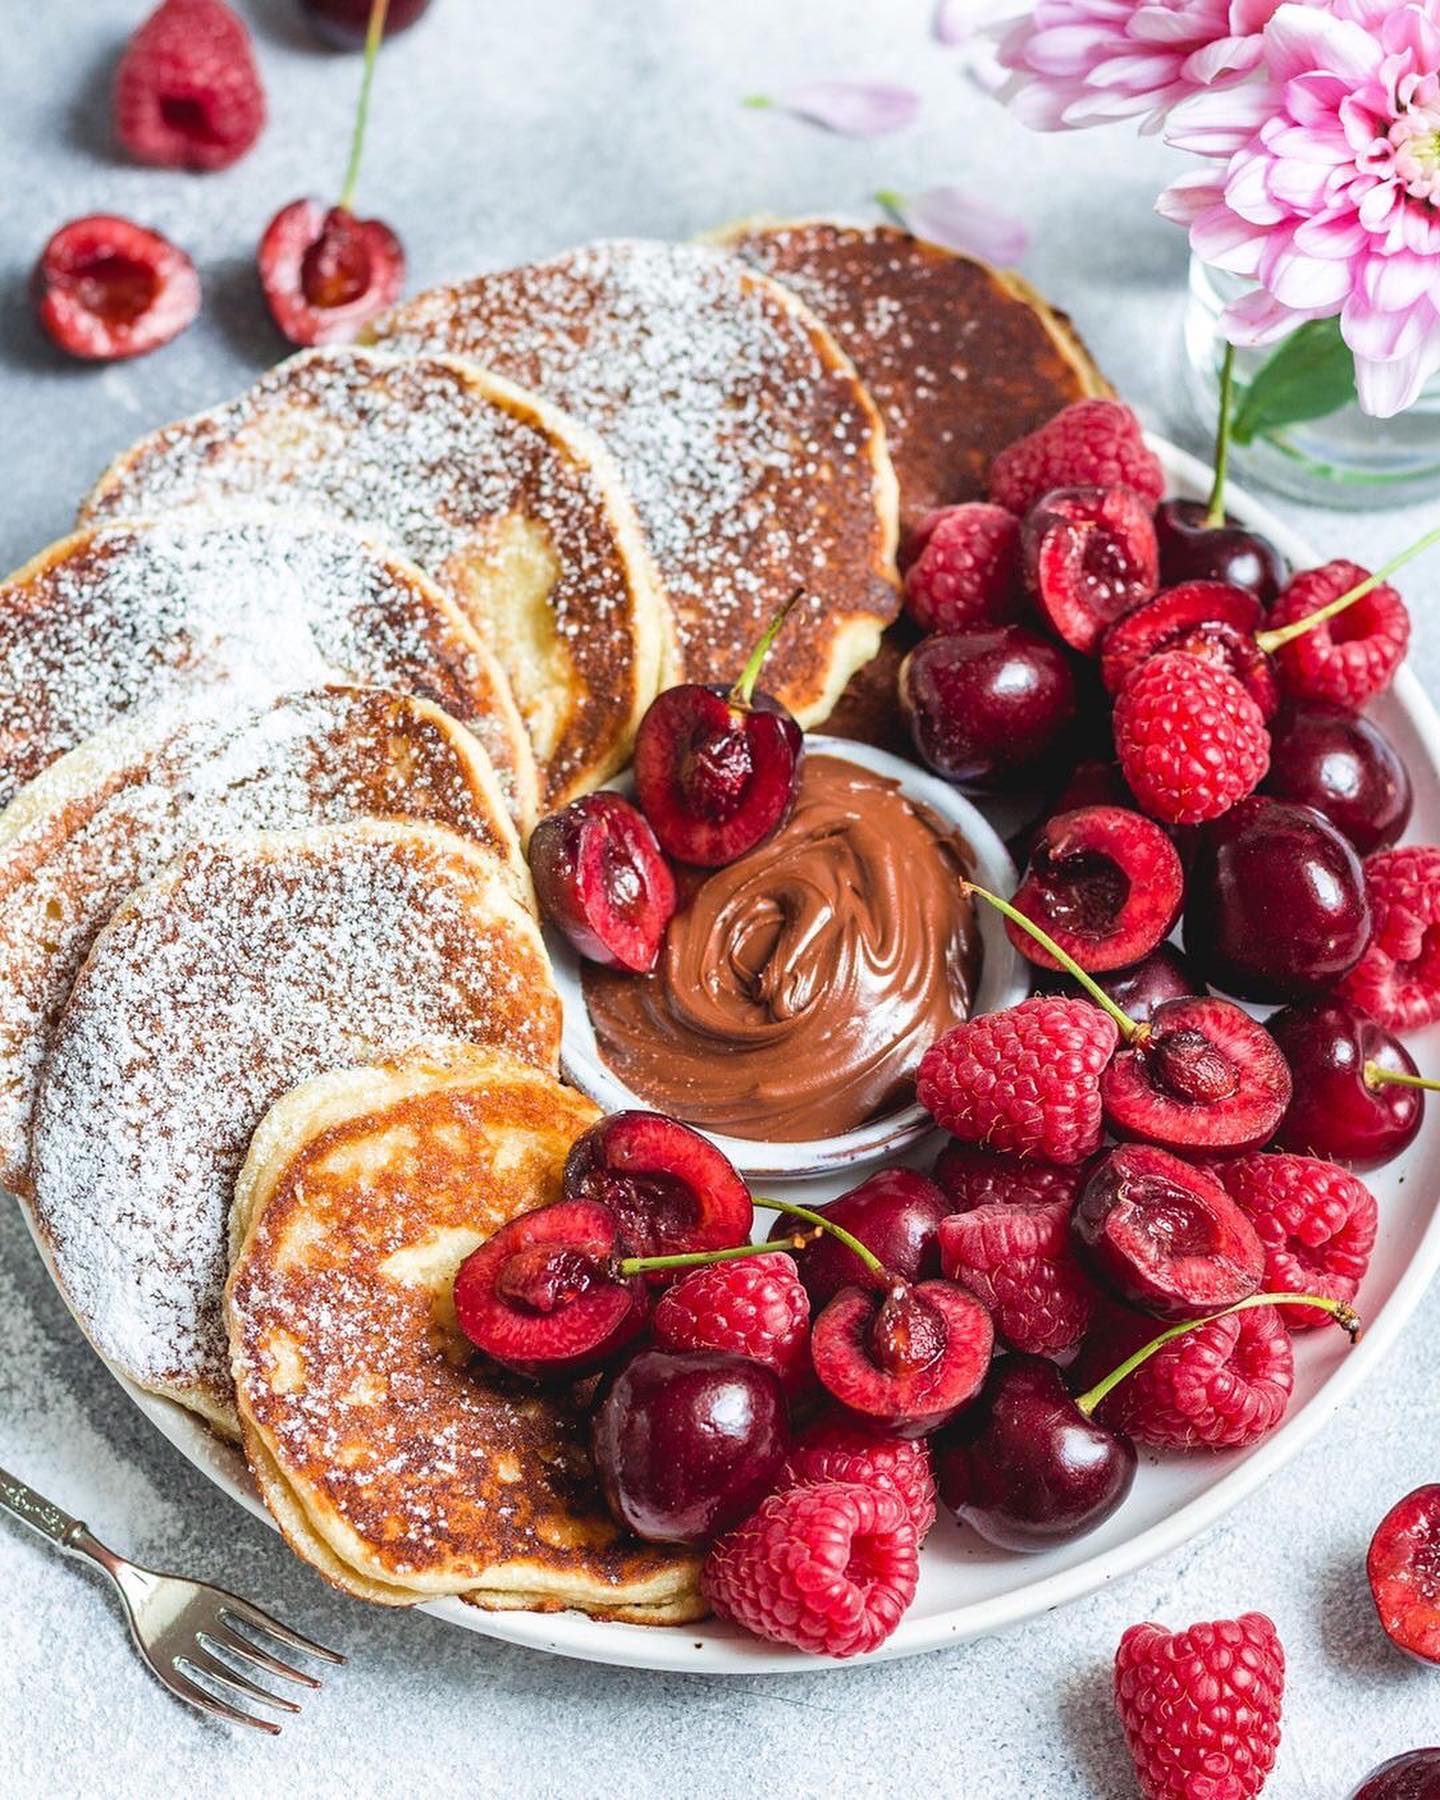 Coconut Yogurt Pancakes with Fruits and Chocolate Spread